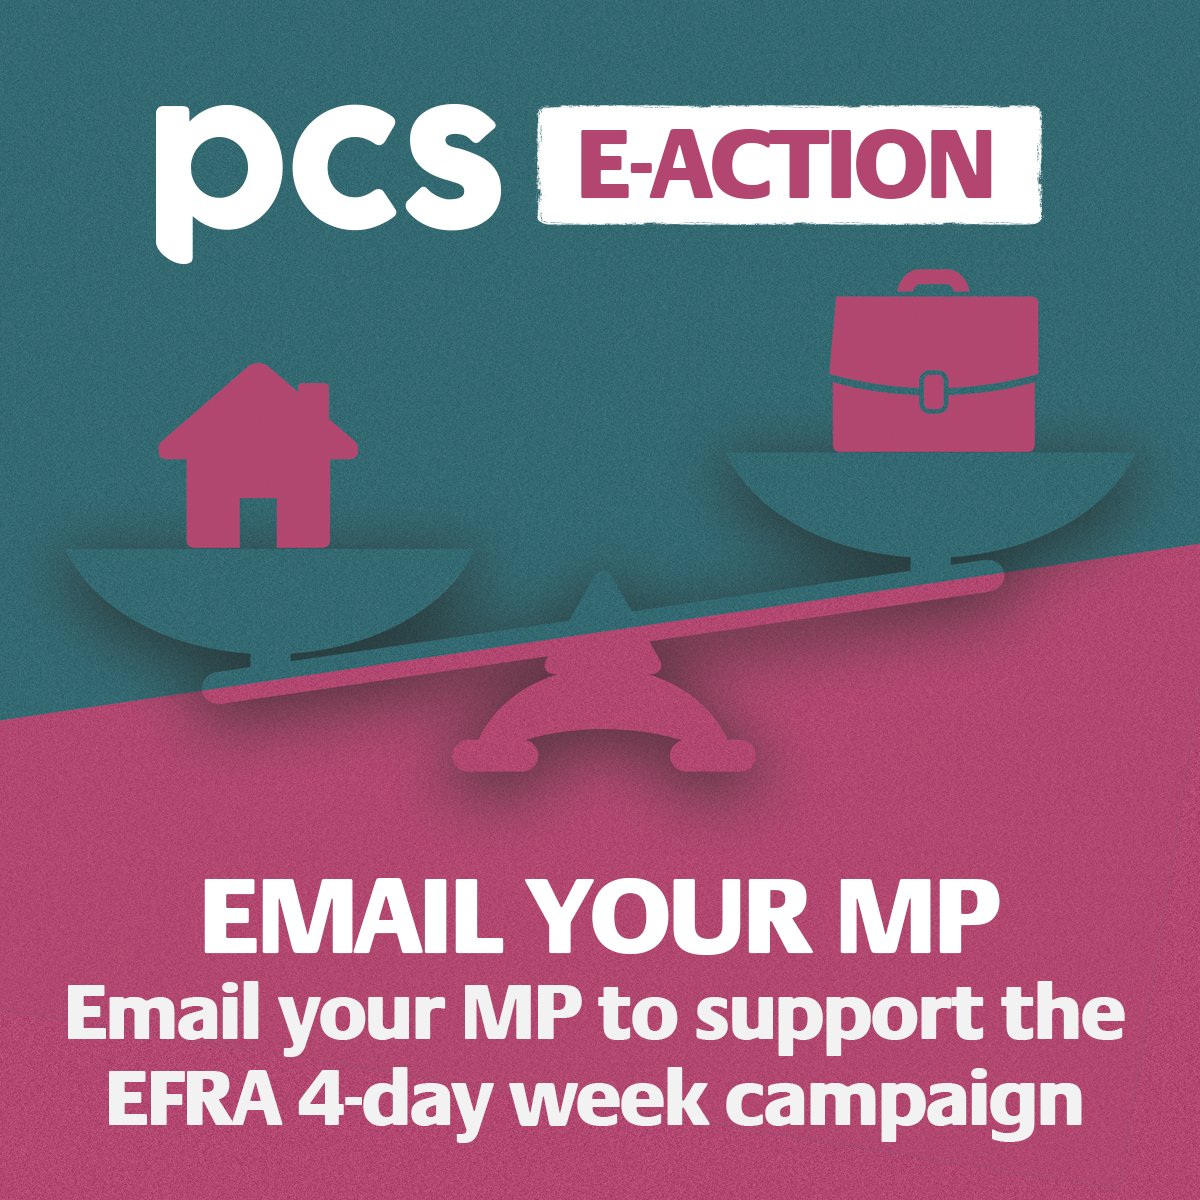 PCS members in the Department for Environment, Food & Rural Affairs are campaigning for a four-day working week pilot. A briefing will be held in Parliament on 5 June to inform MPs about the campaign Make sure your MP is aware. Email today 👇👇 action.pcs.org.uk/page/149531/ac… #PCS